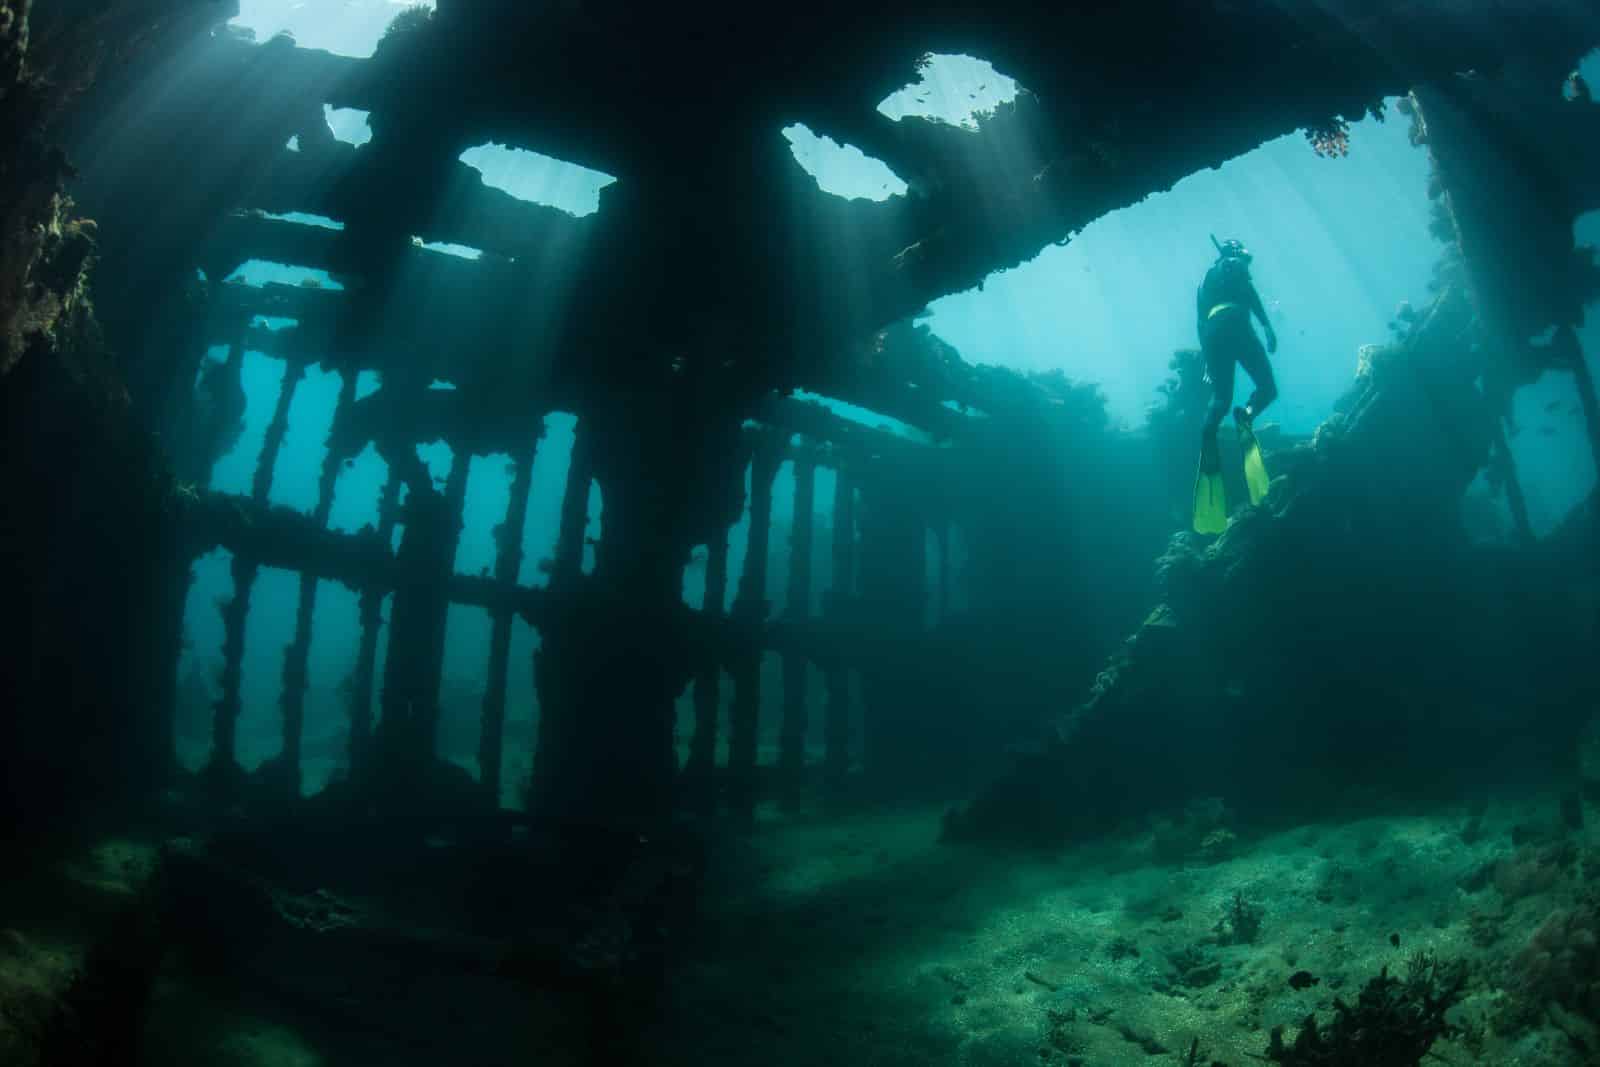 <p class="wp-caption-text">Image Credit: Shutterstock / Ethan Daniels</p>  <p>Yes, Pompano again. The shipwrecks here aren’t just dives; they’re underwater history lessons. Not many can say they’ve explored a sunken tanker, can you?</p>